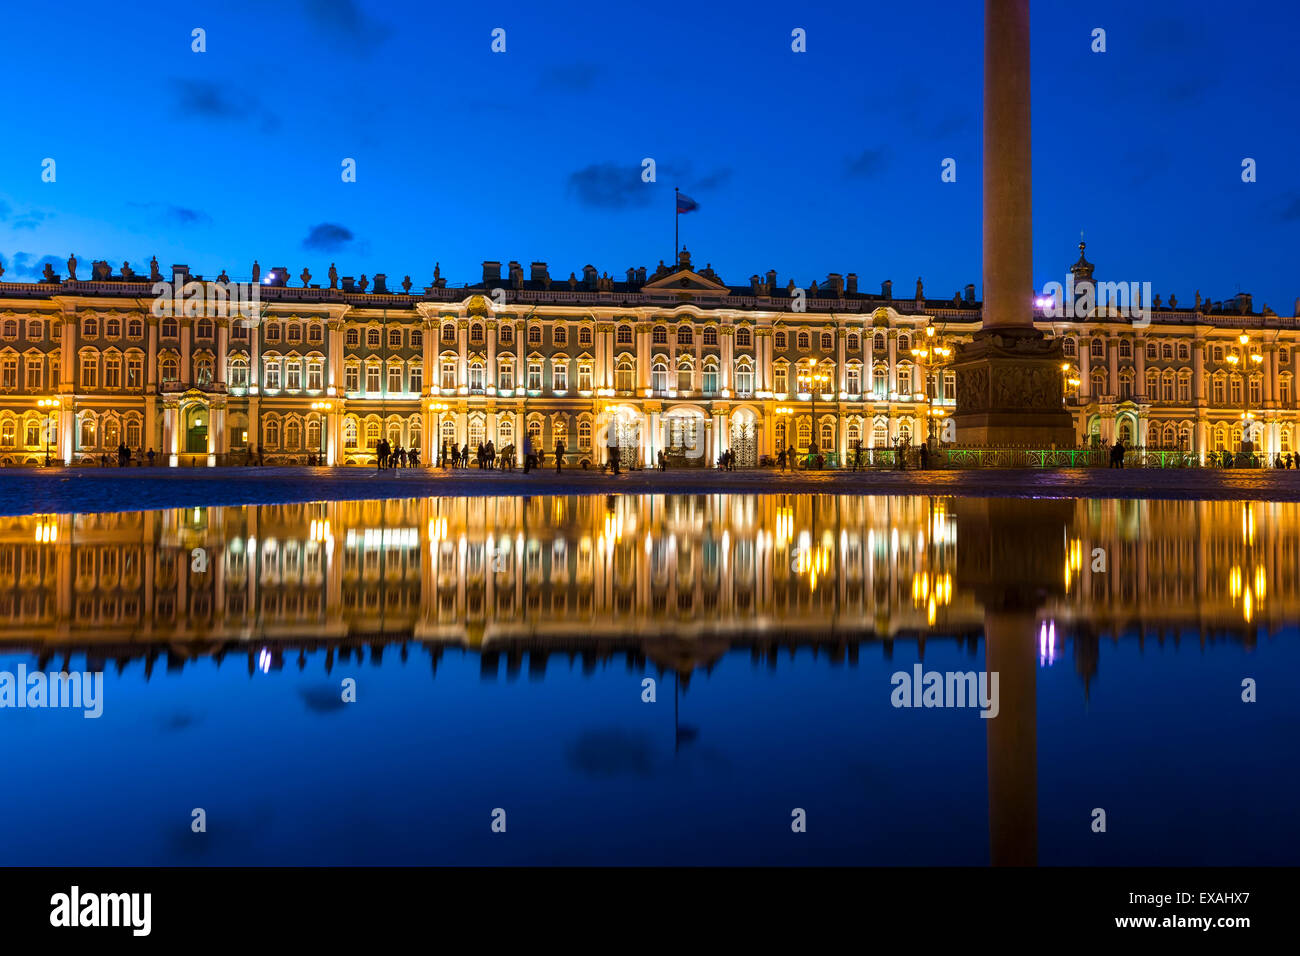 Alexander Column and the Hermitage, Winter Palace, Palace Square, UNESCO World Heritage Site, St. Petersburg, Russia, Europe Stock Photo